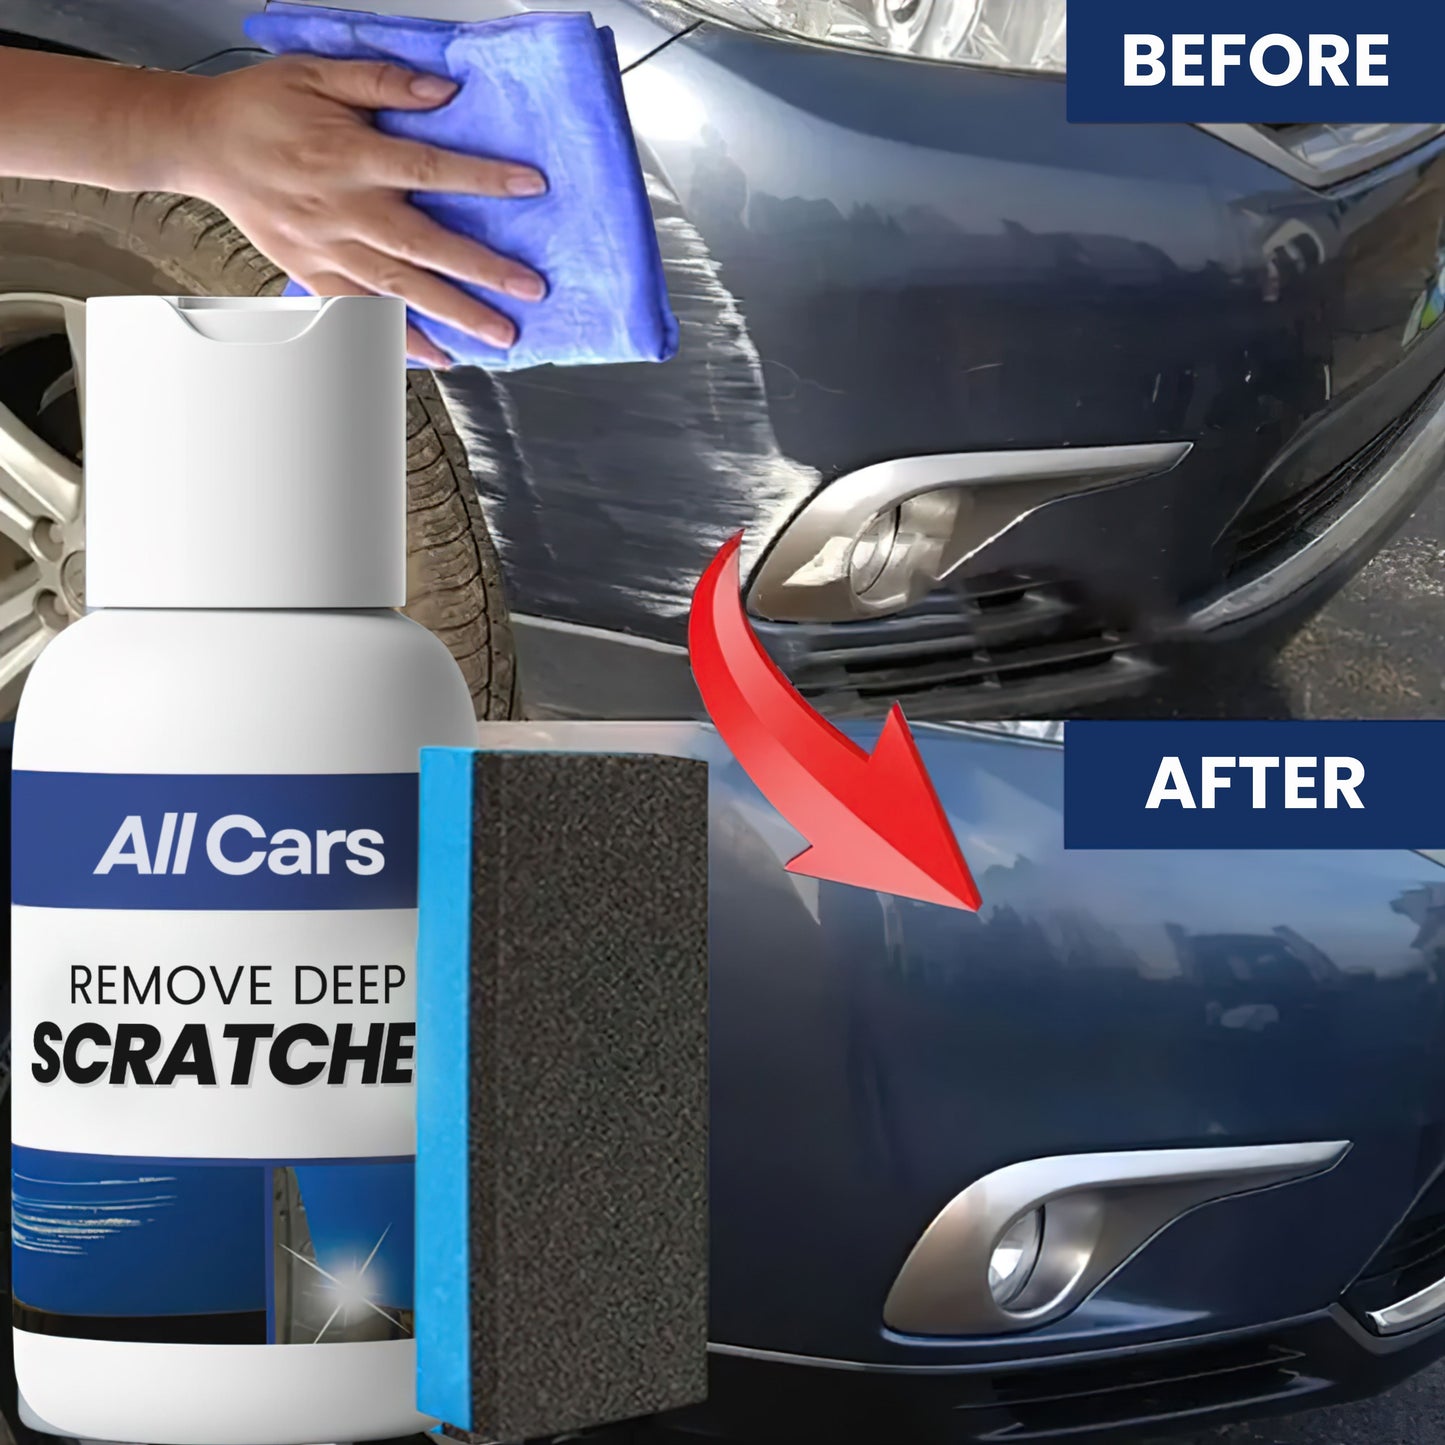 The Deep Scratch Remover | All Cars™